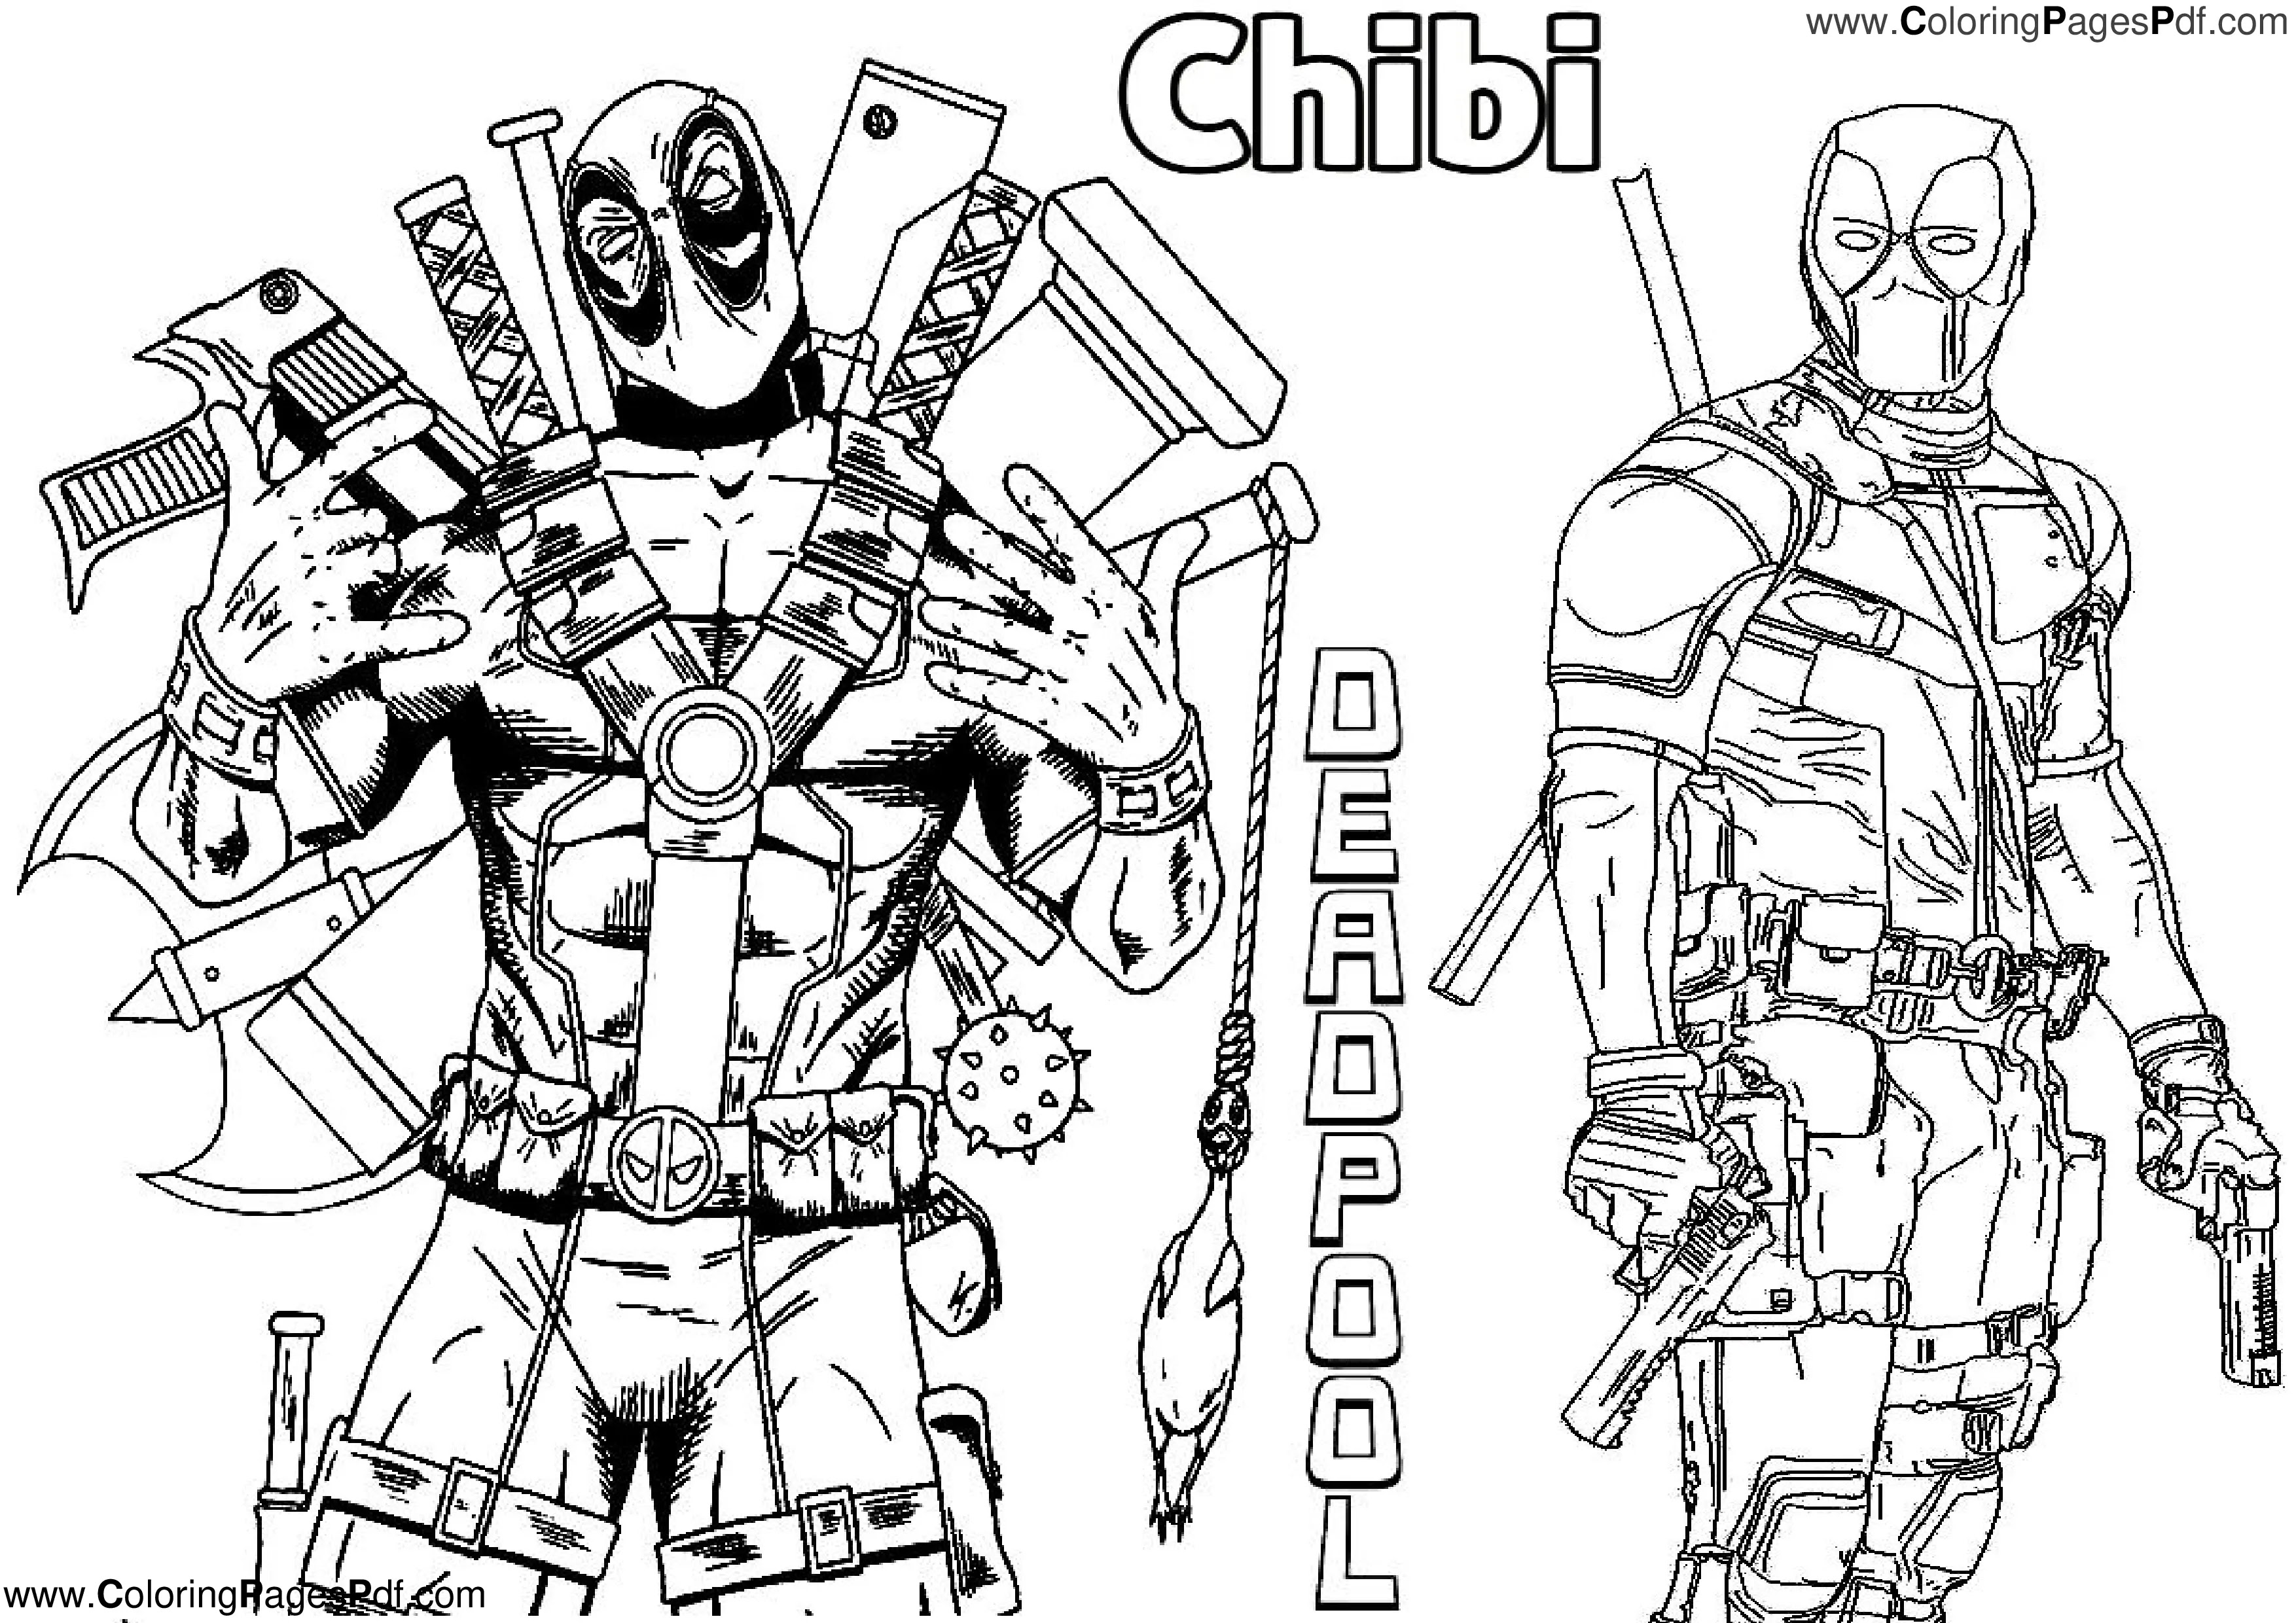 Chibi deadpool coloring pages